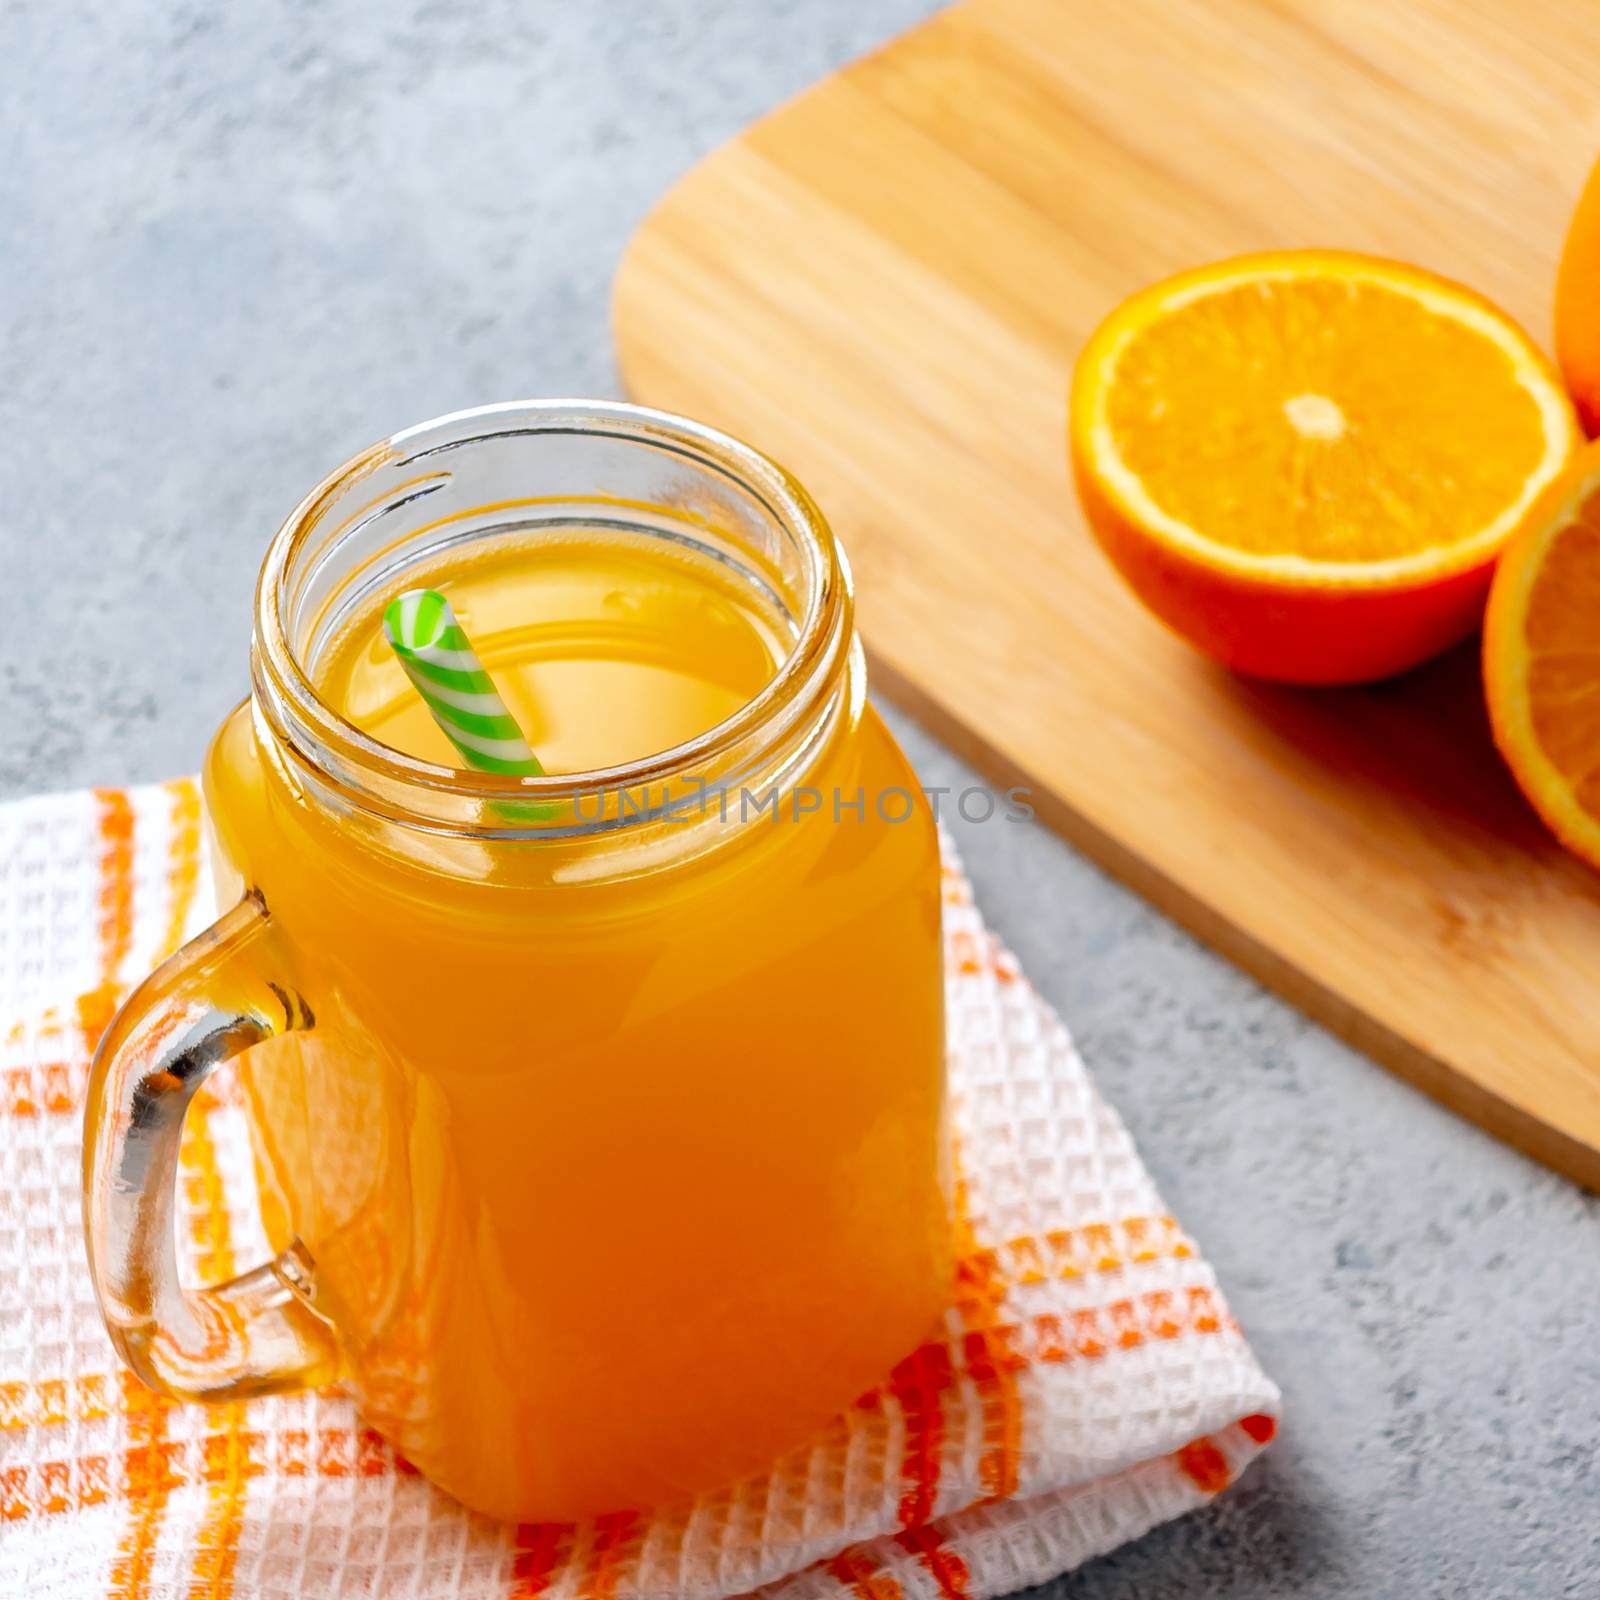 Freshly made citrus juice from oranges in a jar-mug with a straw close up on gray table by galsand